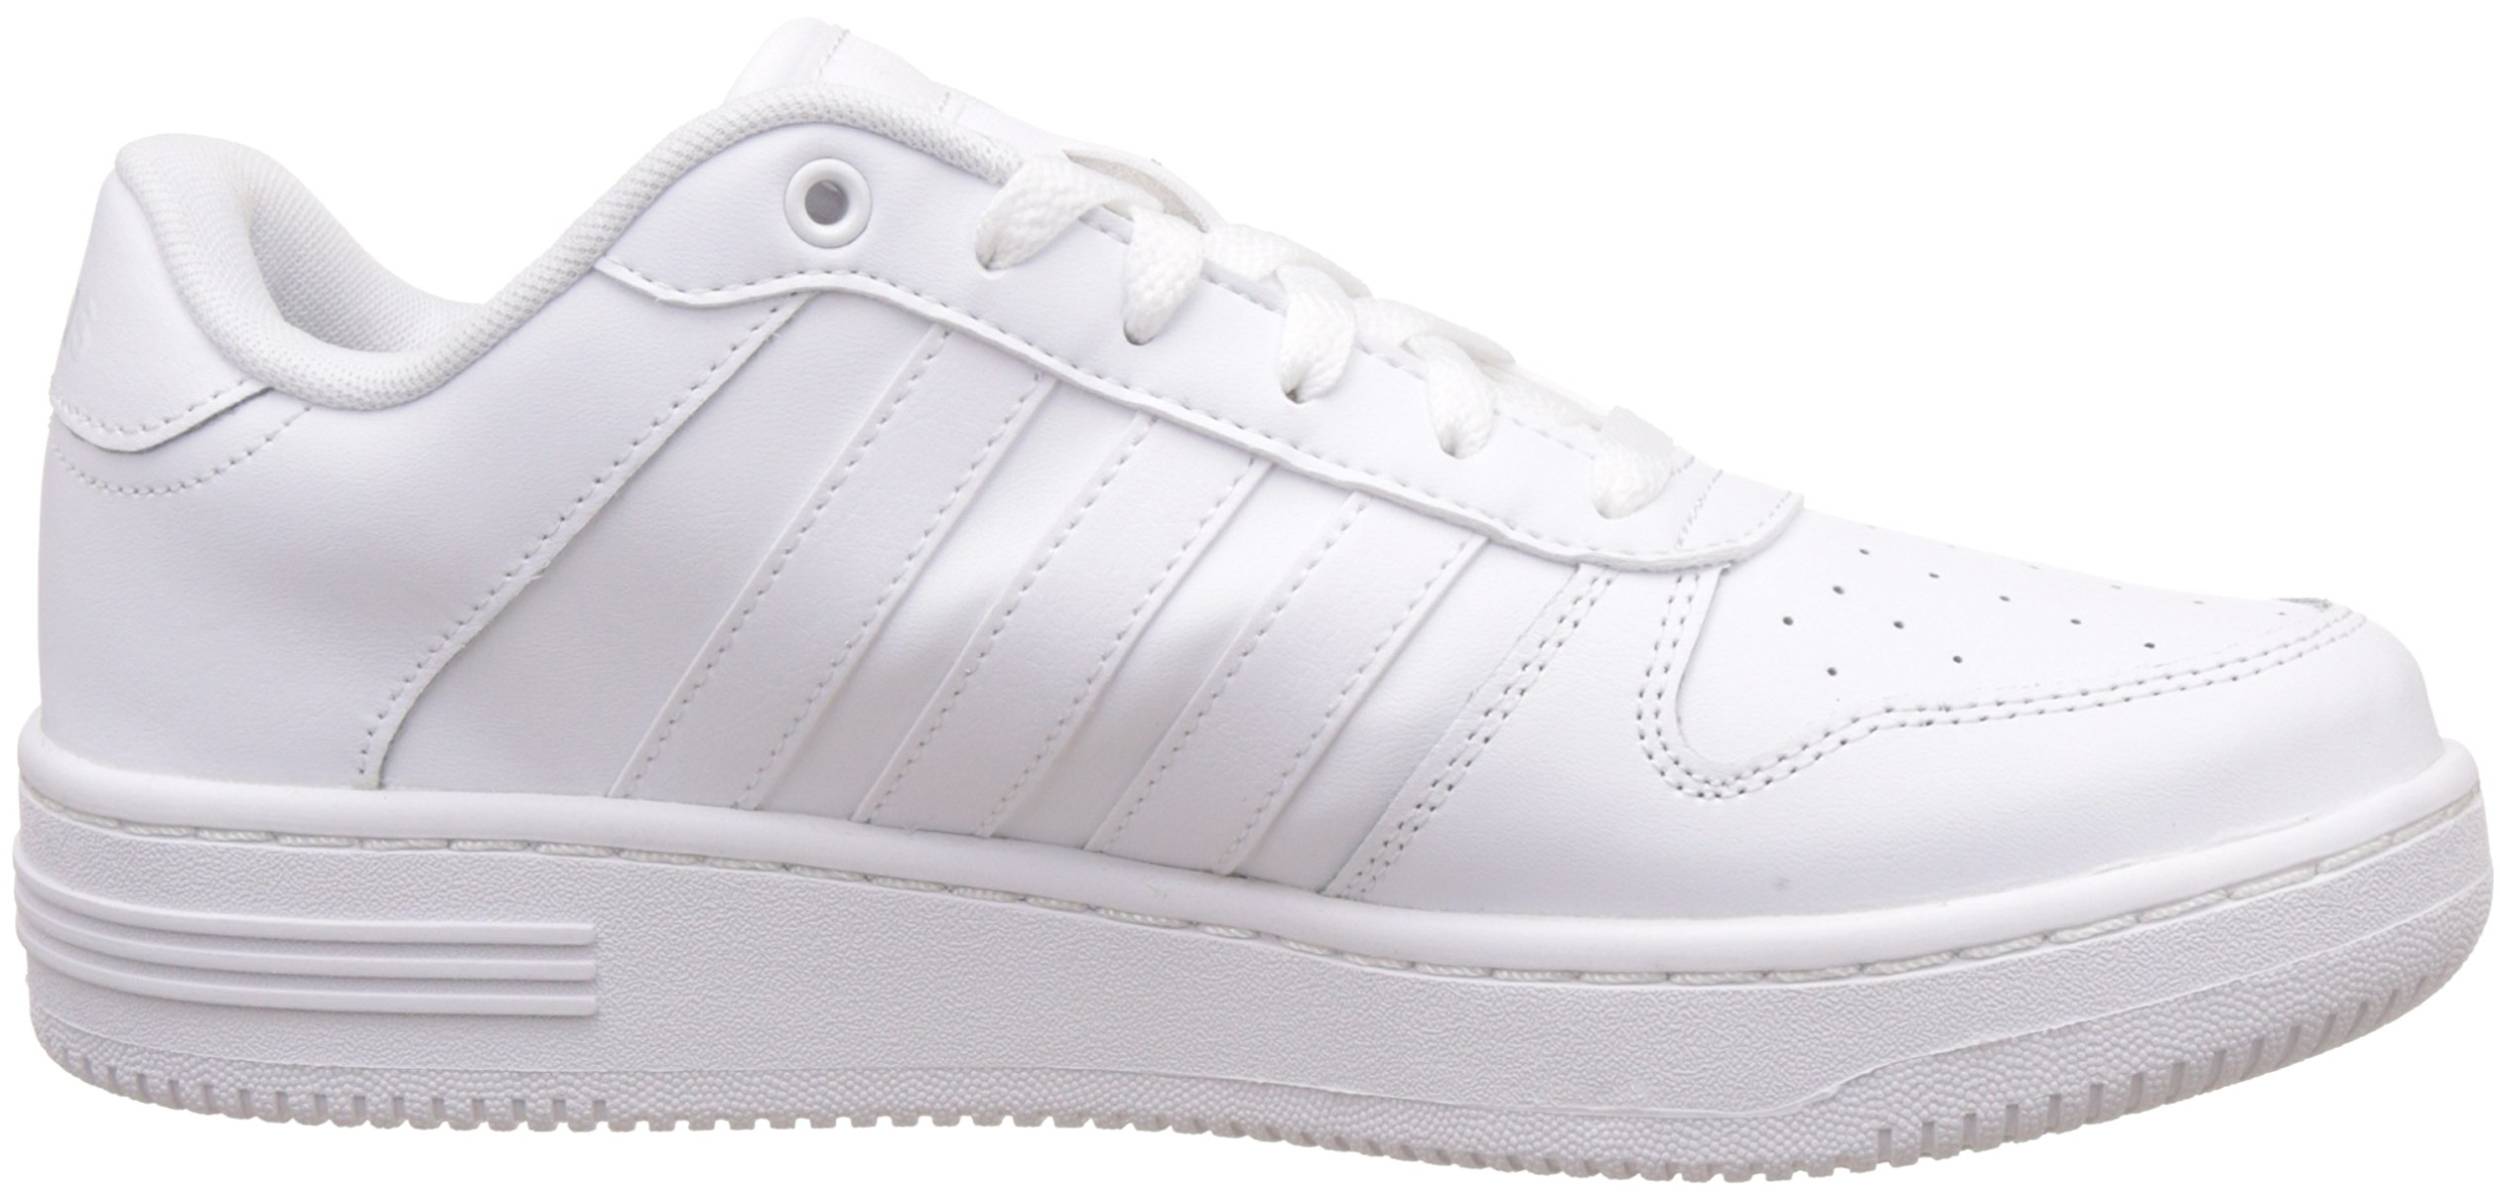 Adidas Team Court sneakers in 6 colors (only $33) | RunRepeat